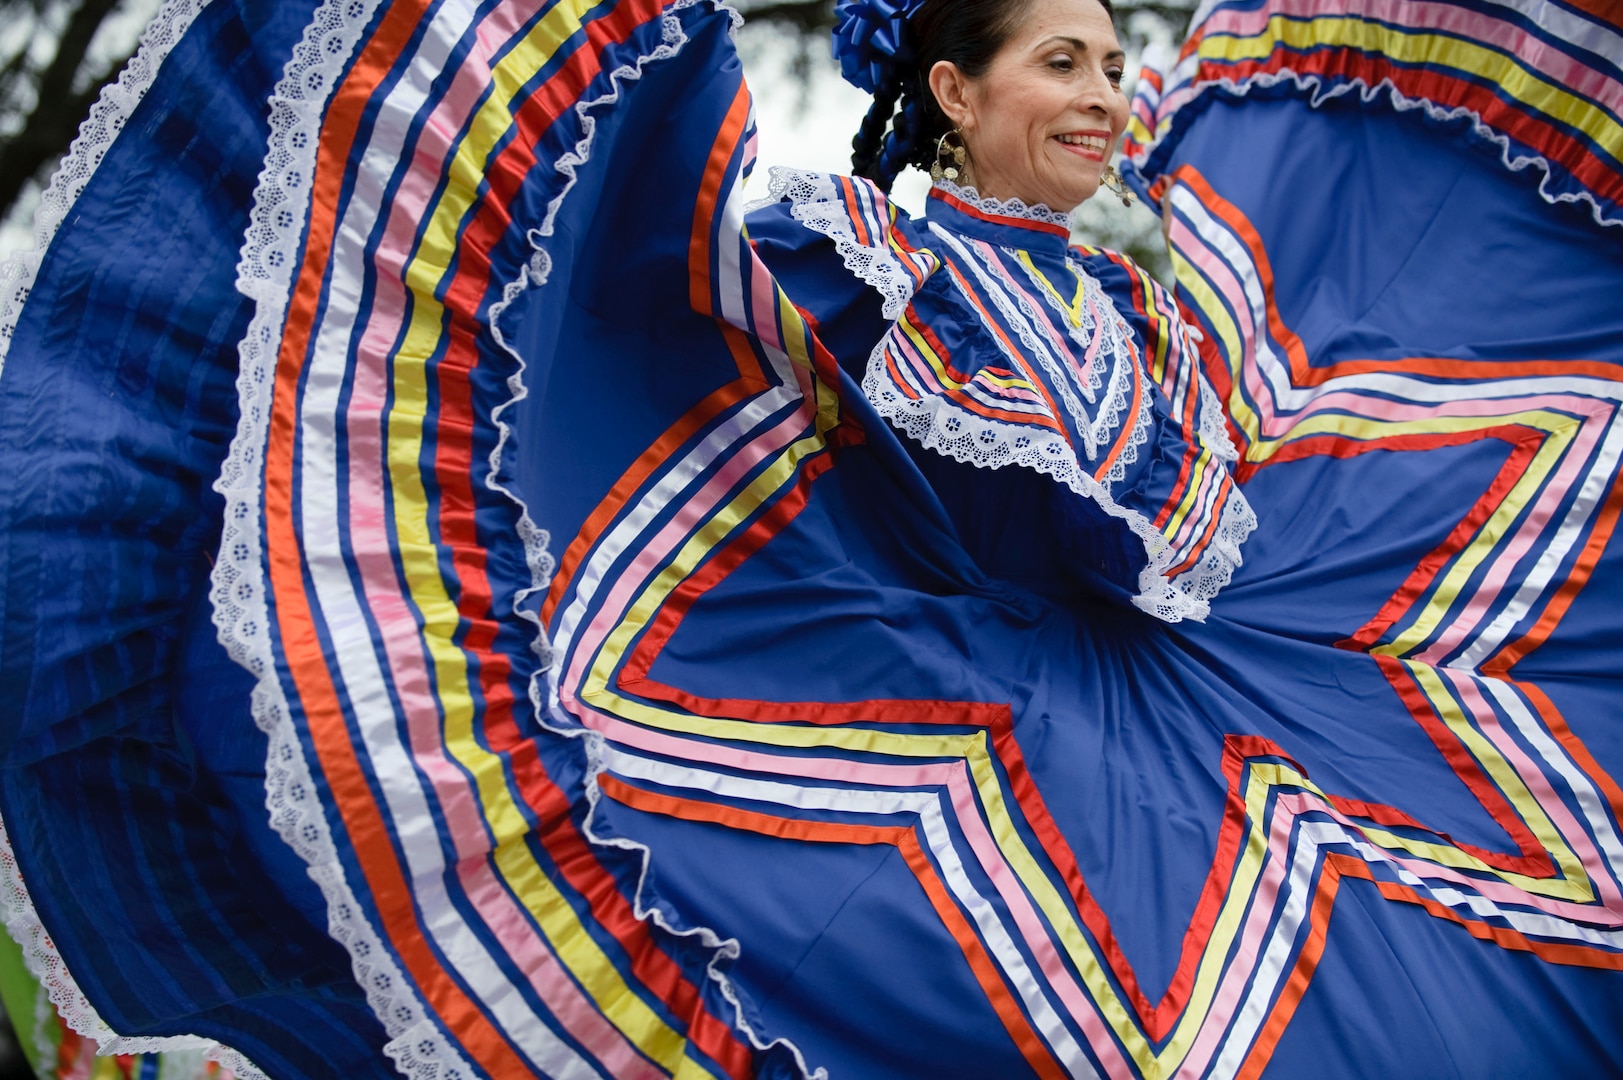 Laura Sanchez, a Mexican Folklorico dancer with Grupo Amistad sponsored by the University of the Incarnate Word, performs at the Randolph Hispanic Heritage Council kick off of Hispanic Heritage Month Sept. 14 during an event filled with music, folkloric dancing, a salsa competition and local cuisine. (U.S. Air Force photo/Steve Thurow) 